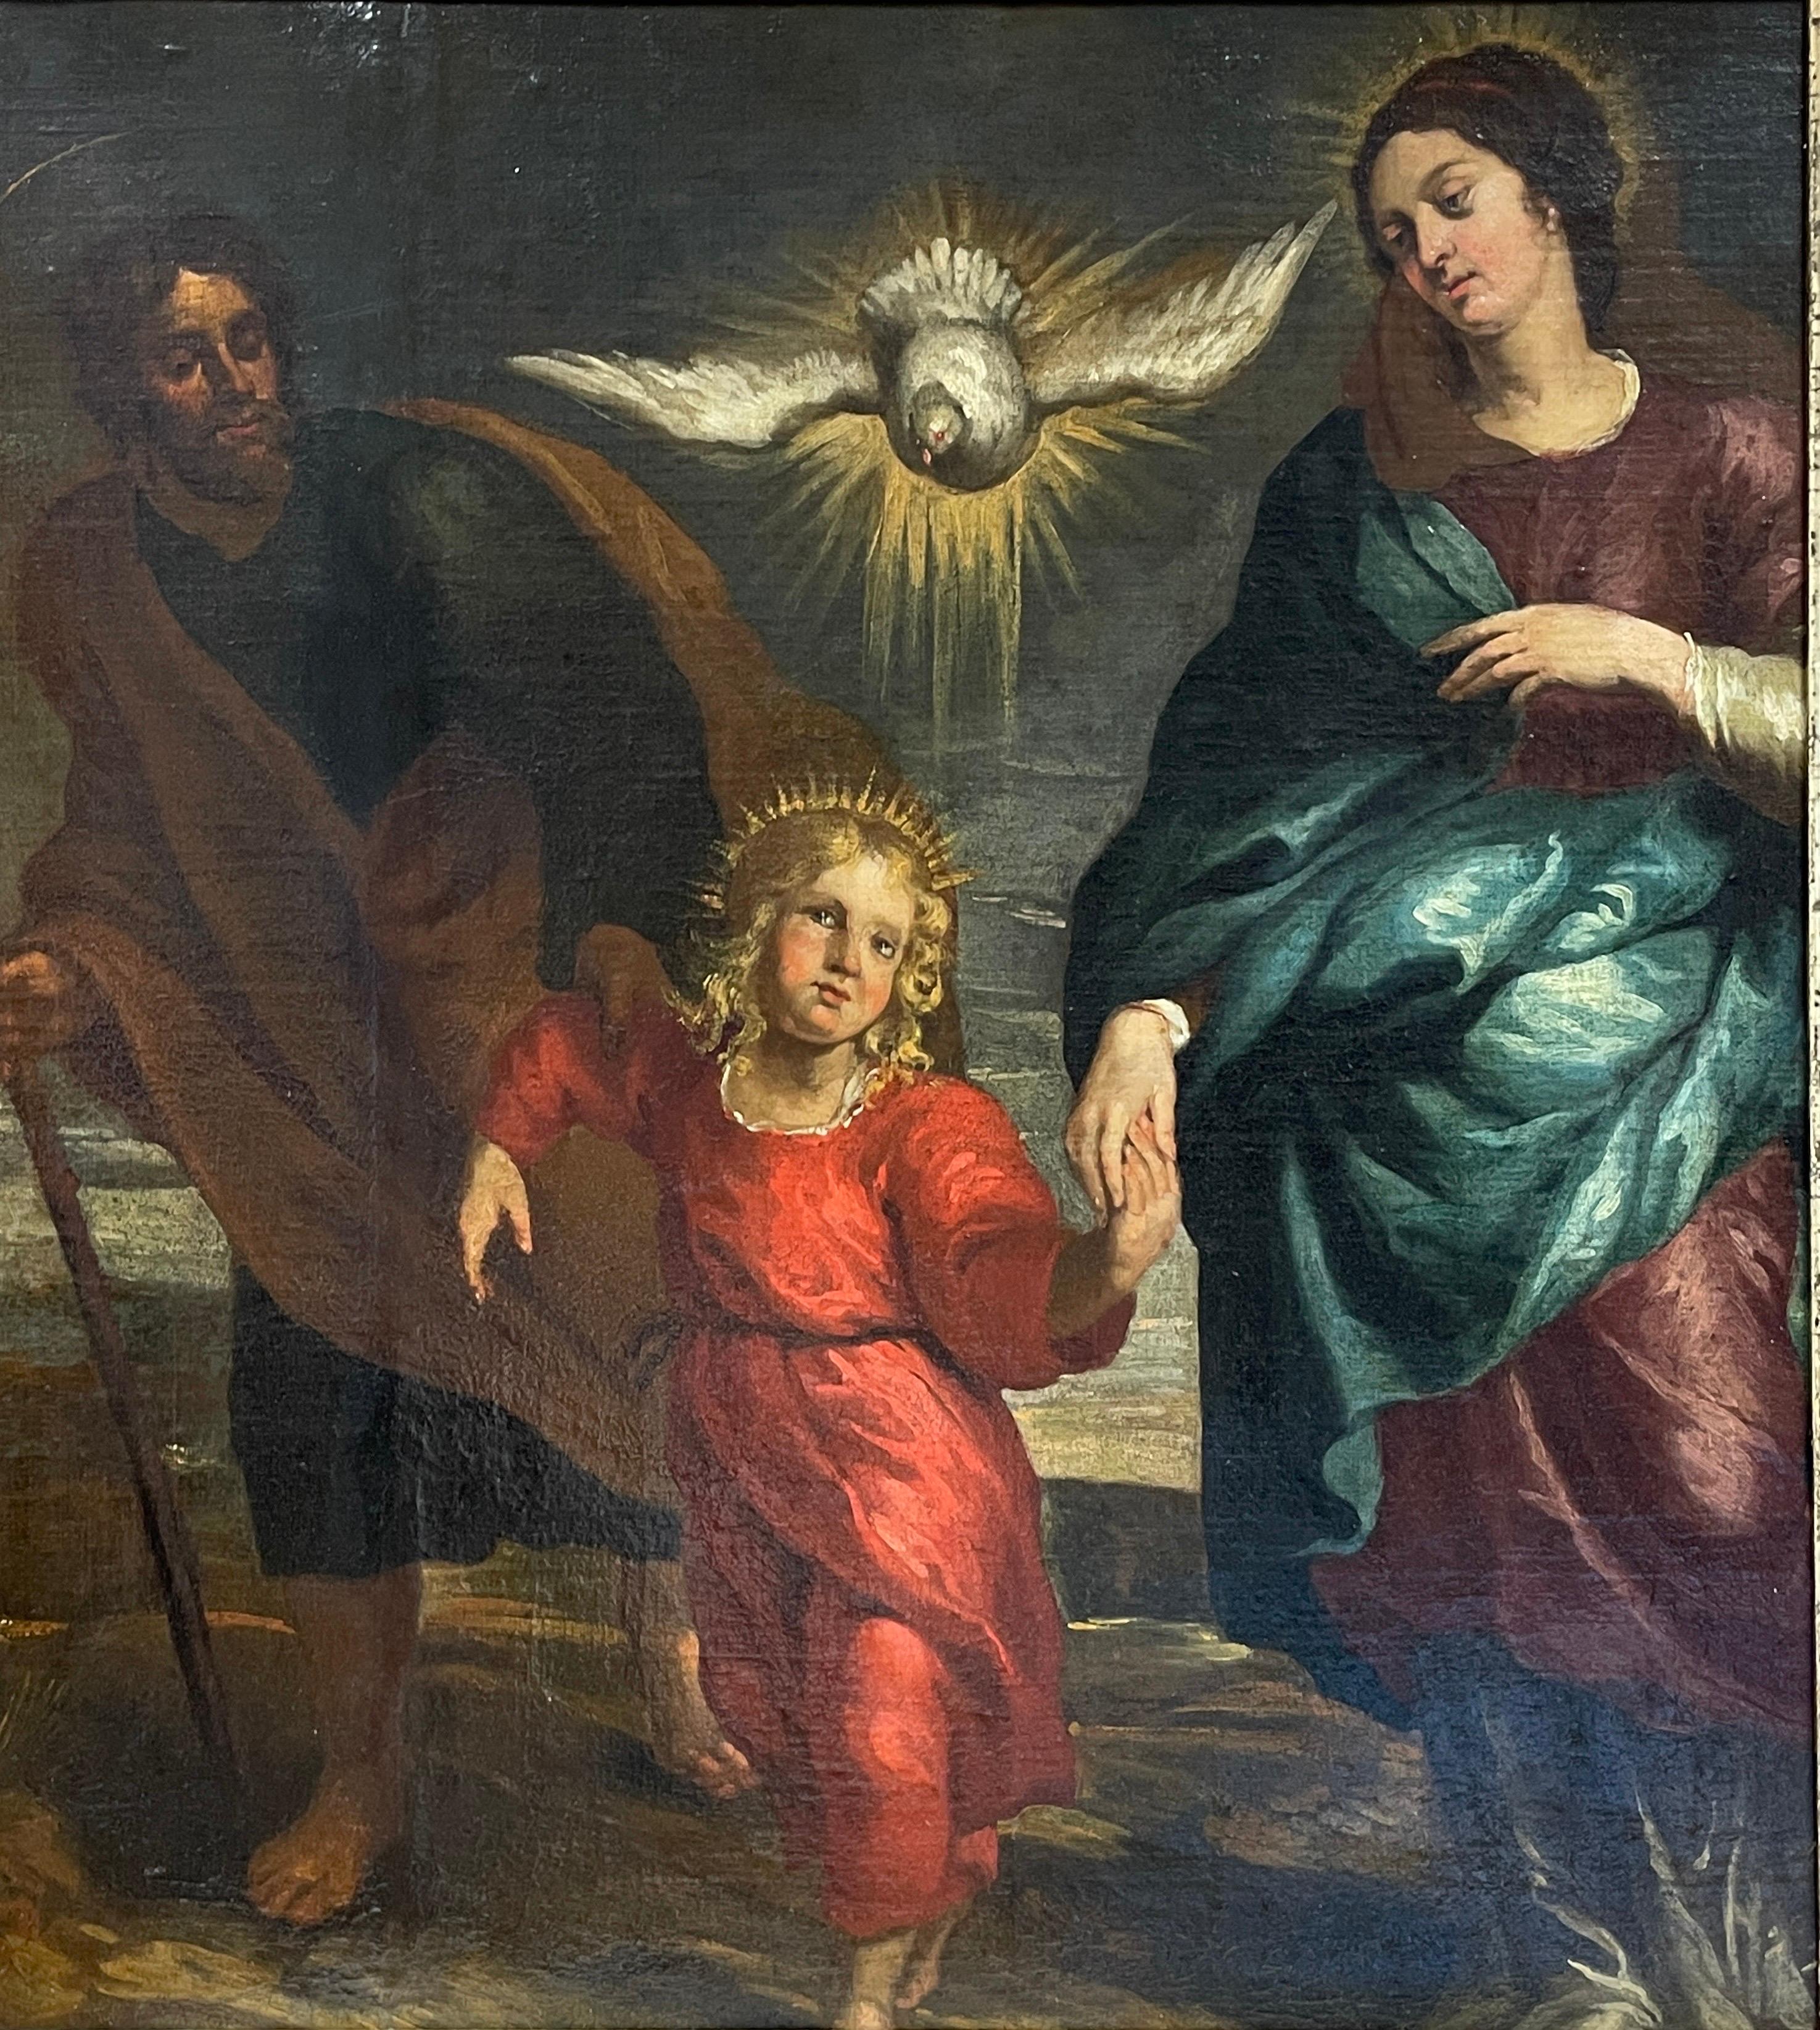 Italian School, 17th century
'The Holy Family'
oil painting on canvas, framed: 31 x 28 inches
condition: excellent
provenance: private collection, Paris